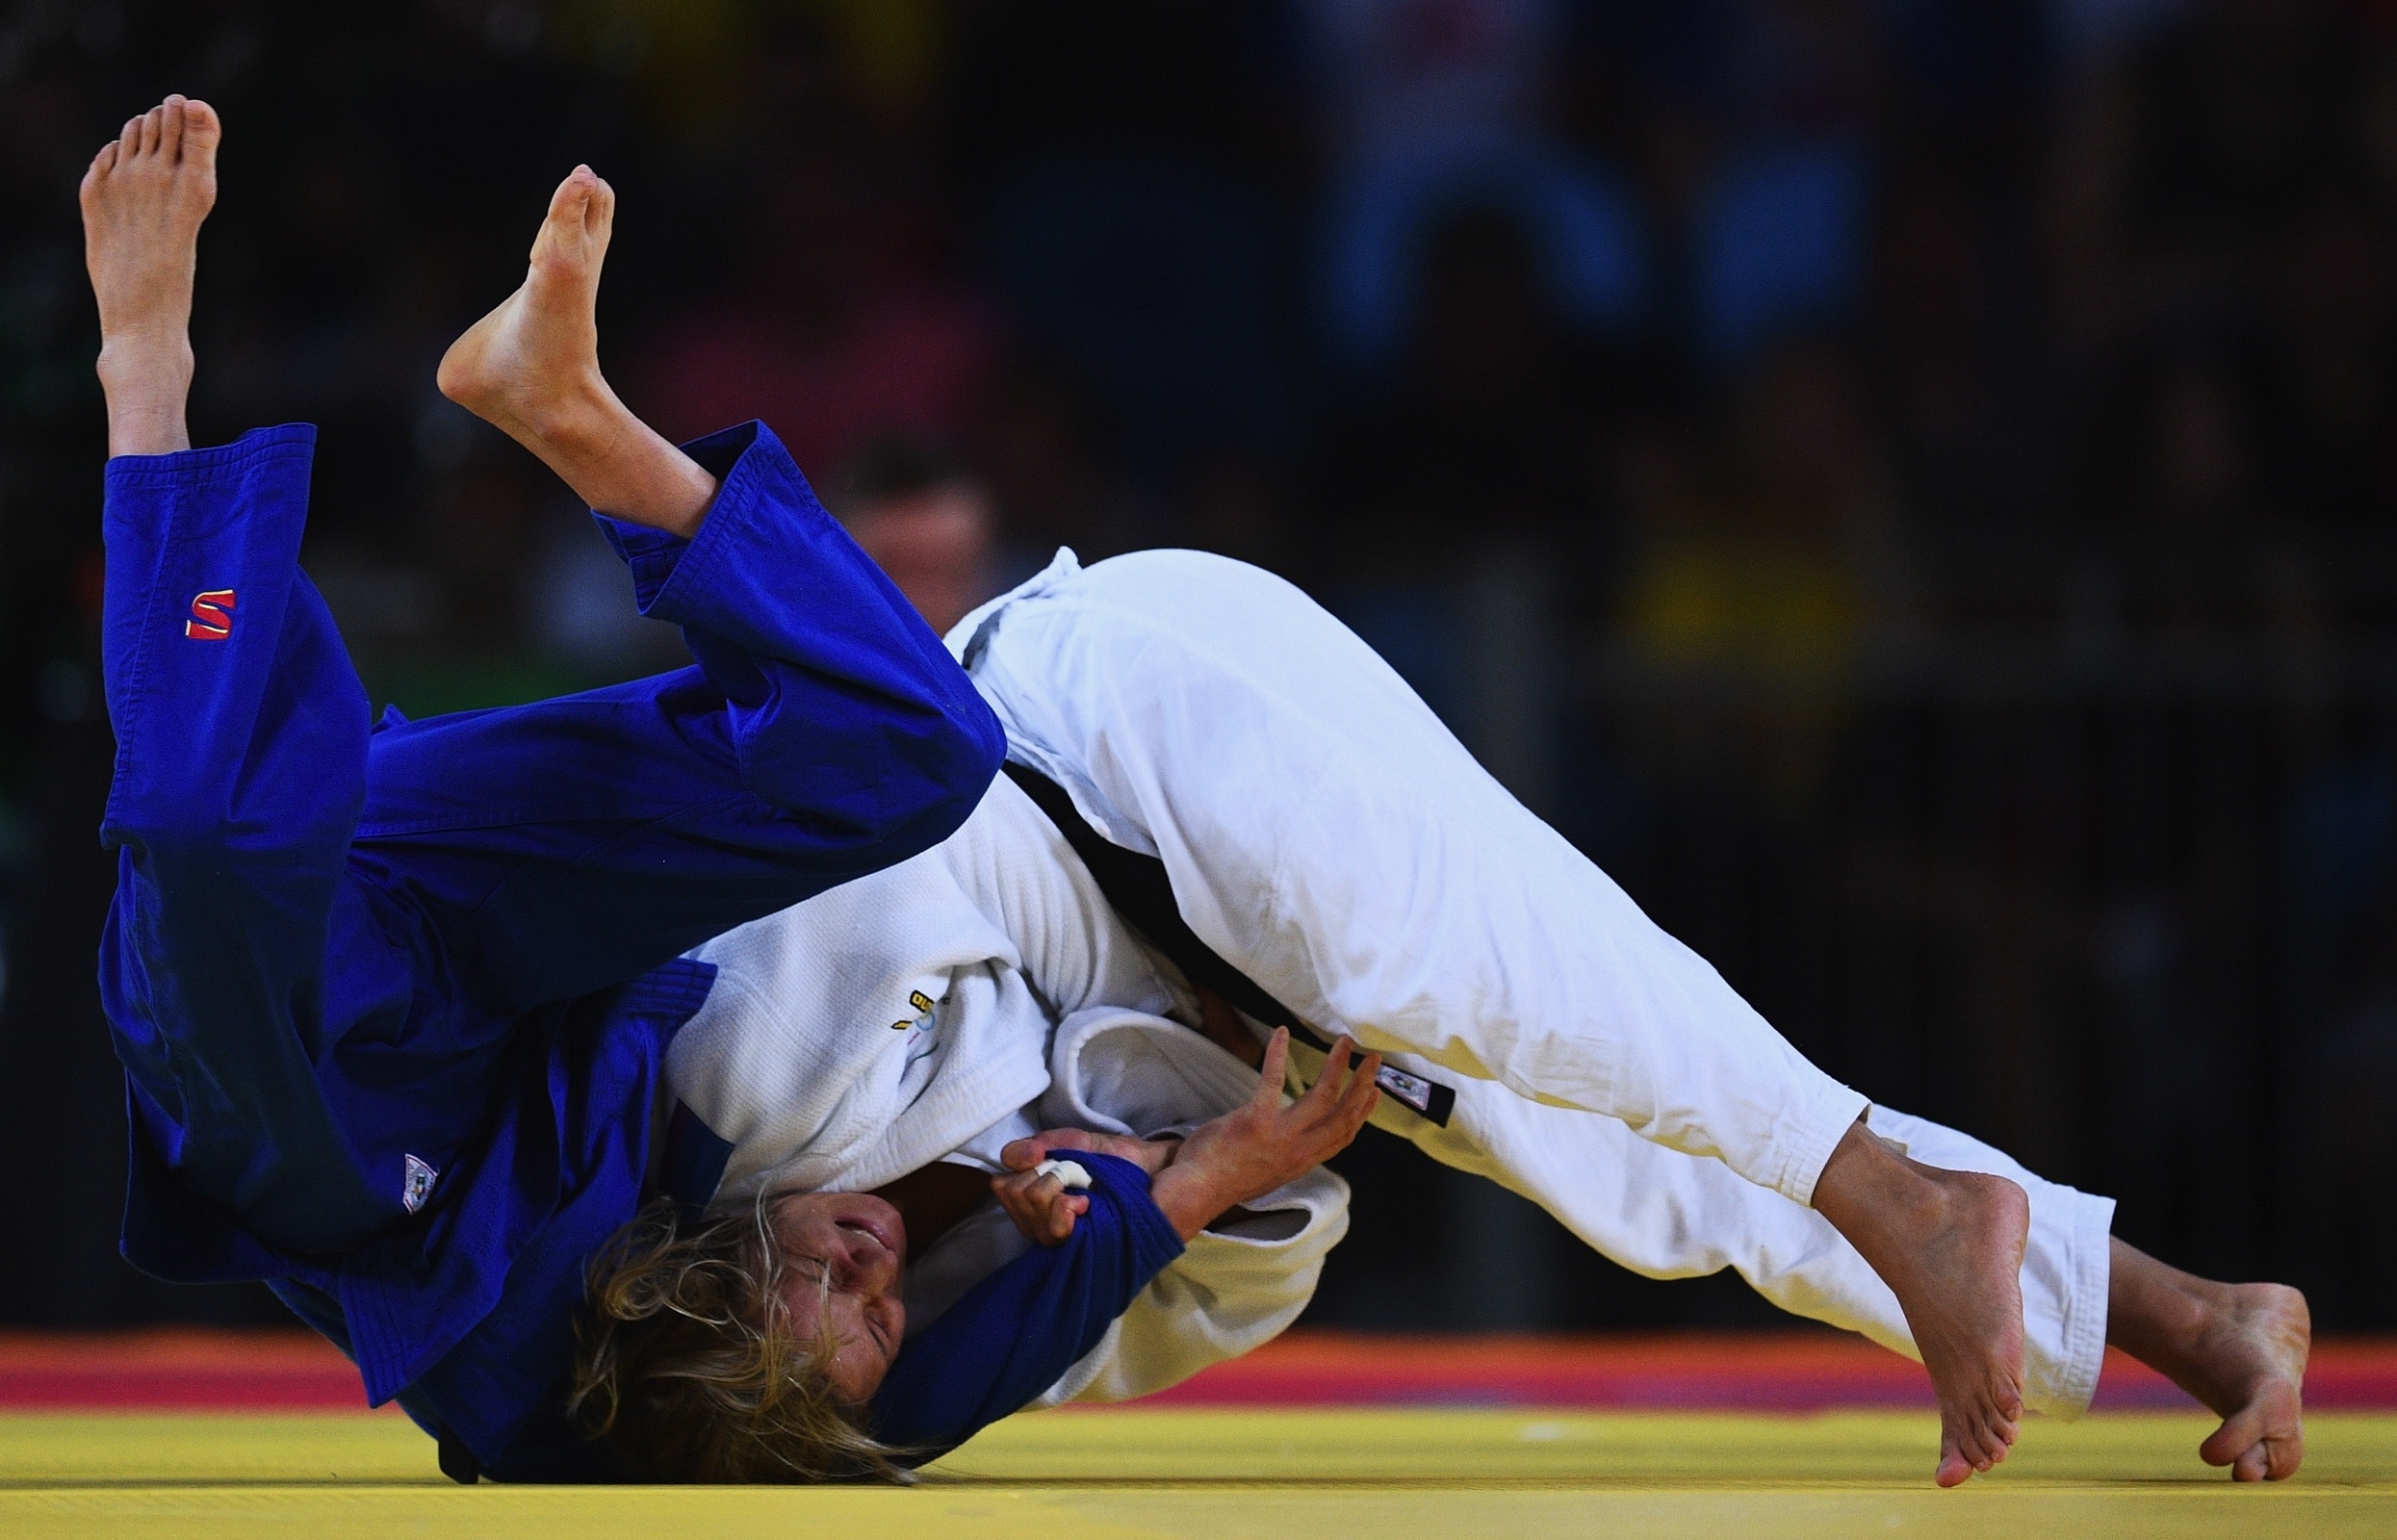 Judo: Telma Monteiro of Portugal competes against Darcina Manuel of New Zealand, Rio 2016 Olympic Games. 2490x1600 HD Wallpaper.